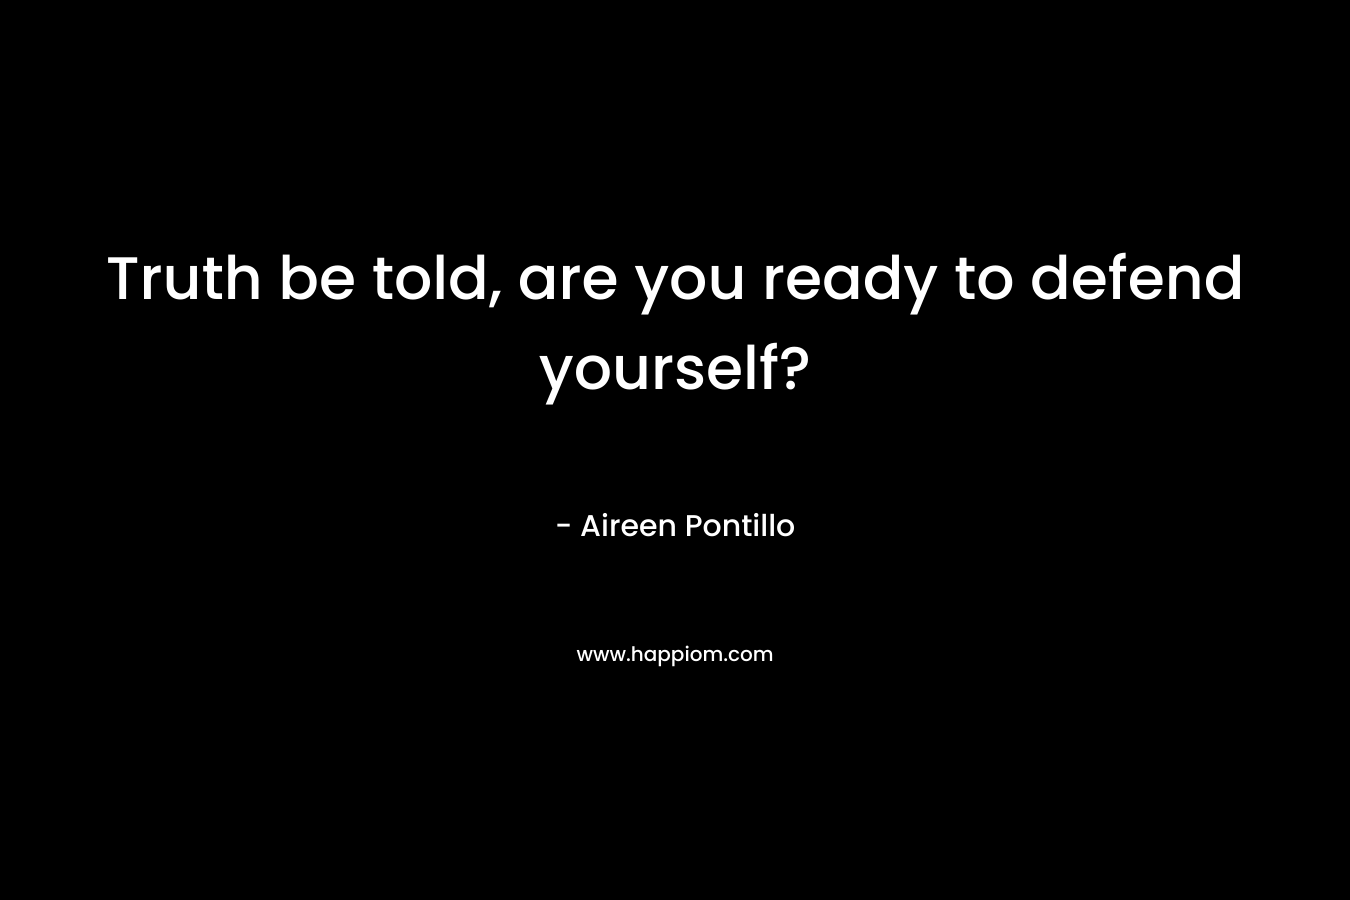 Truth be told, are you ready to defend yourself? – Aireen Pontillo